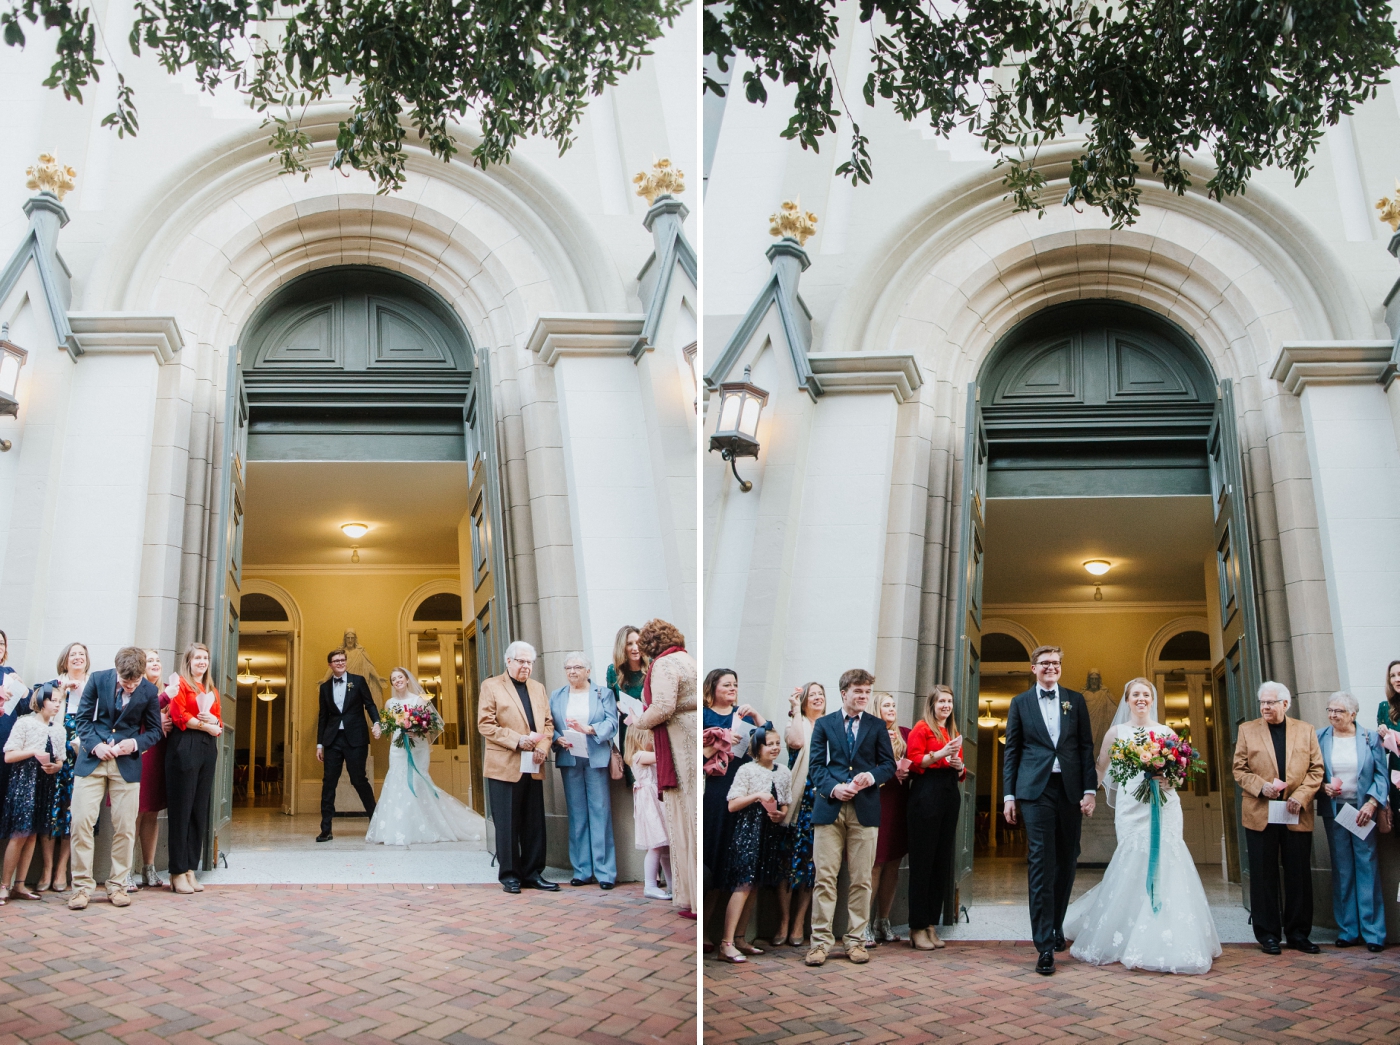 Wedding ceremony at the Lutheran Church of the Ascension in Savannah